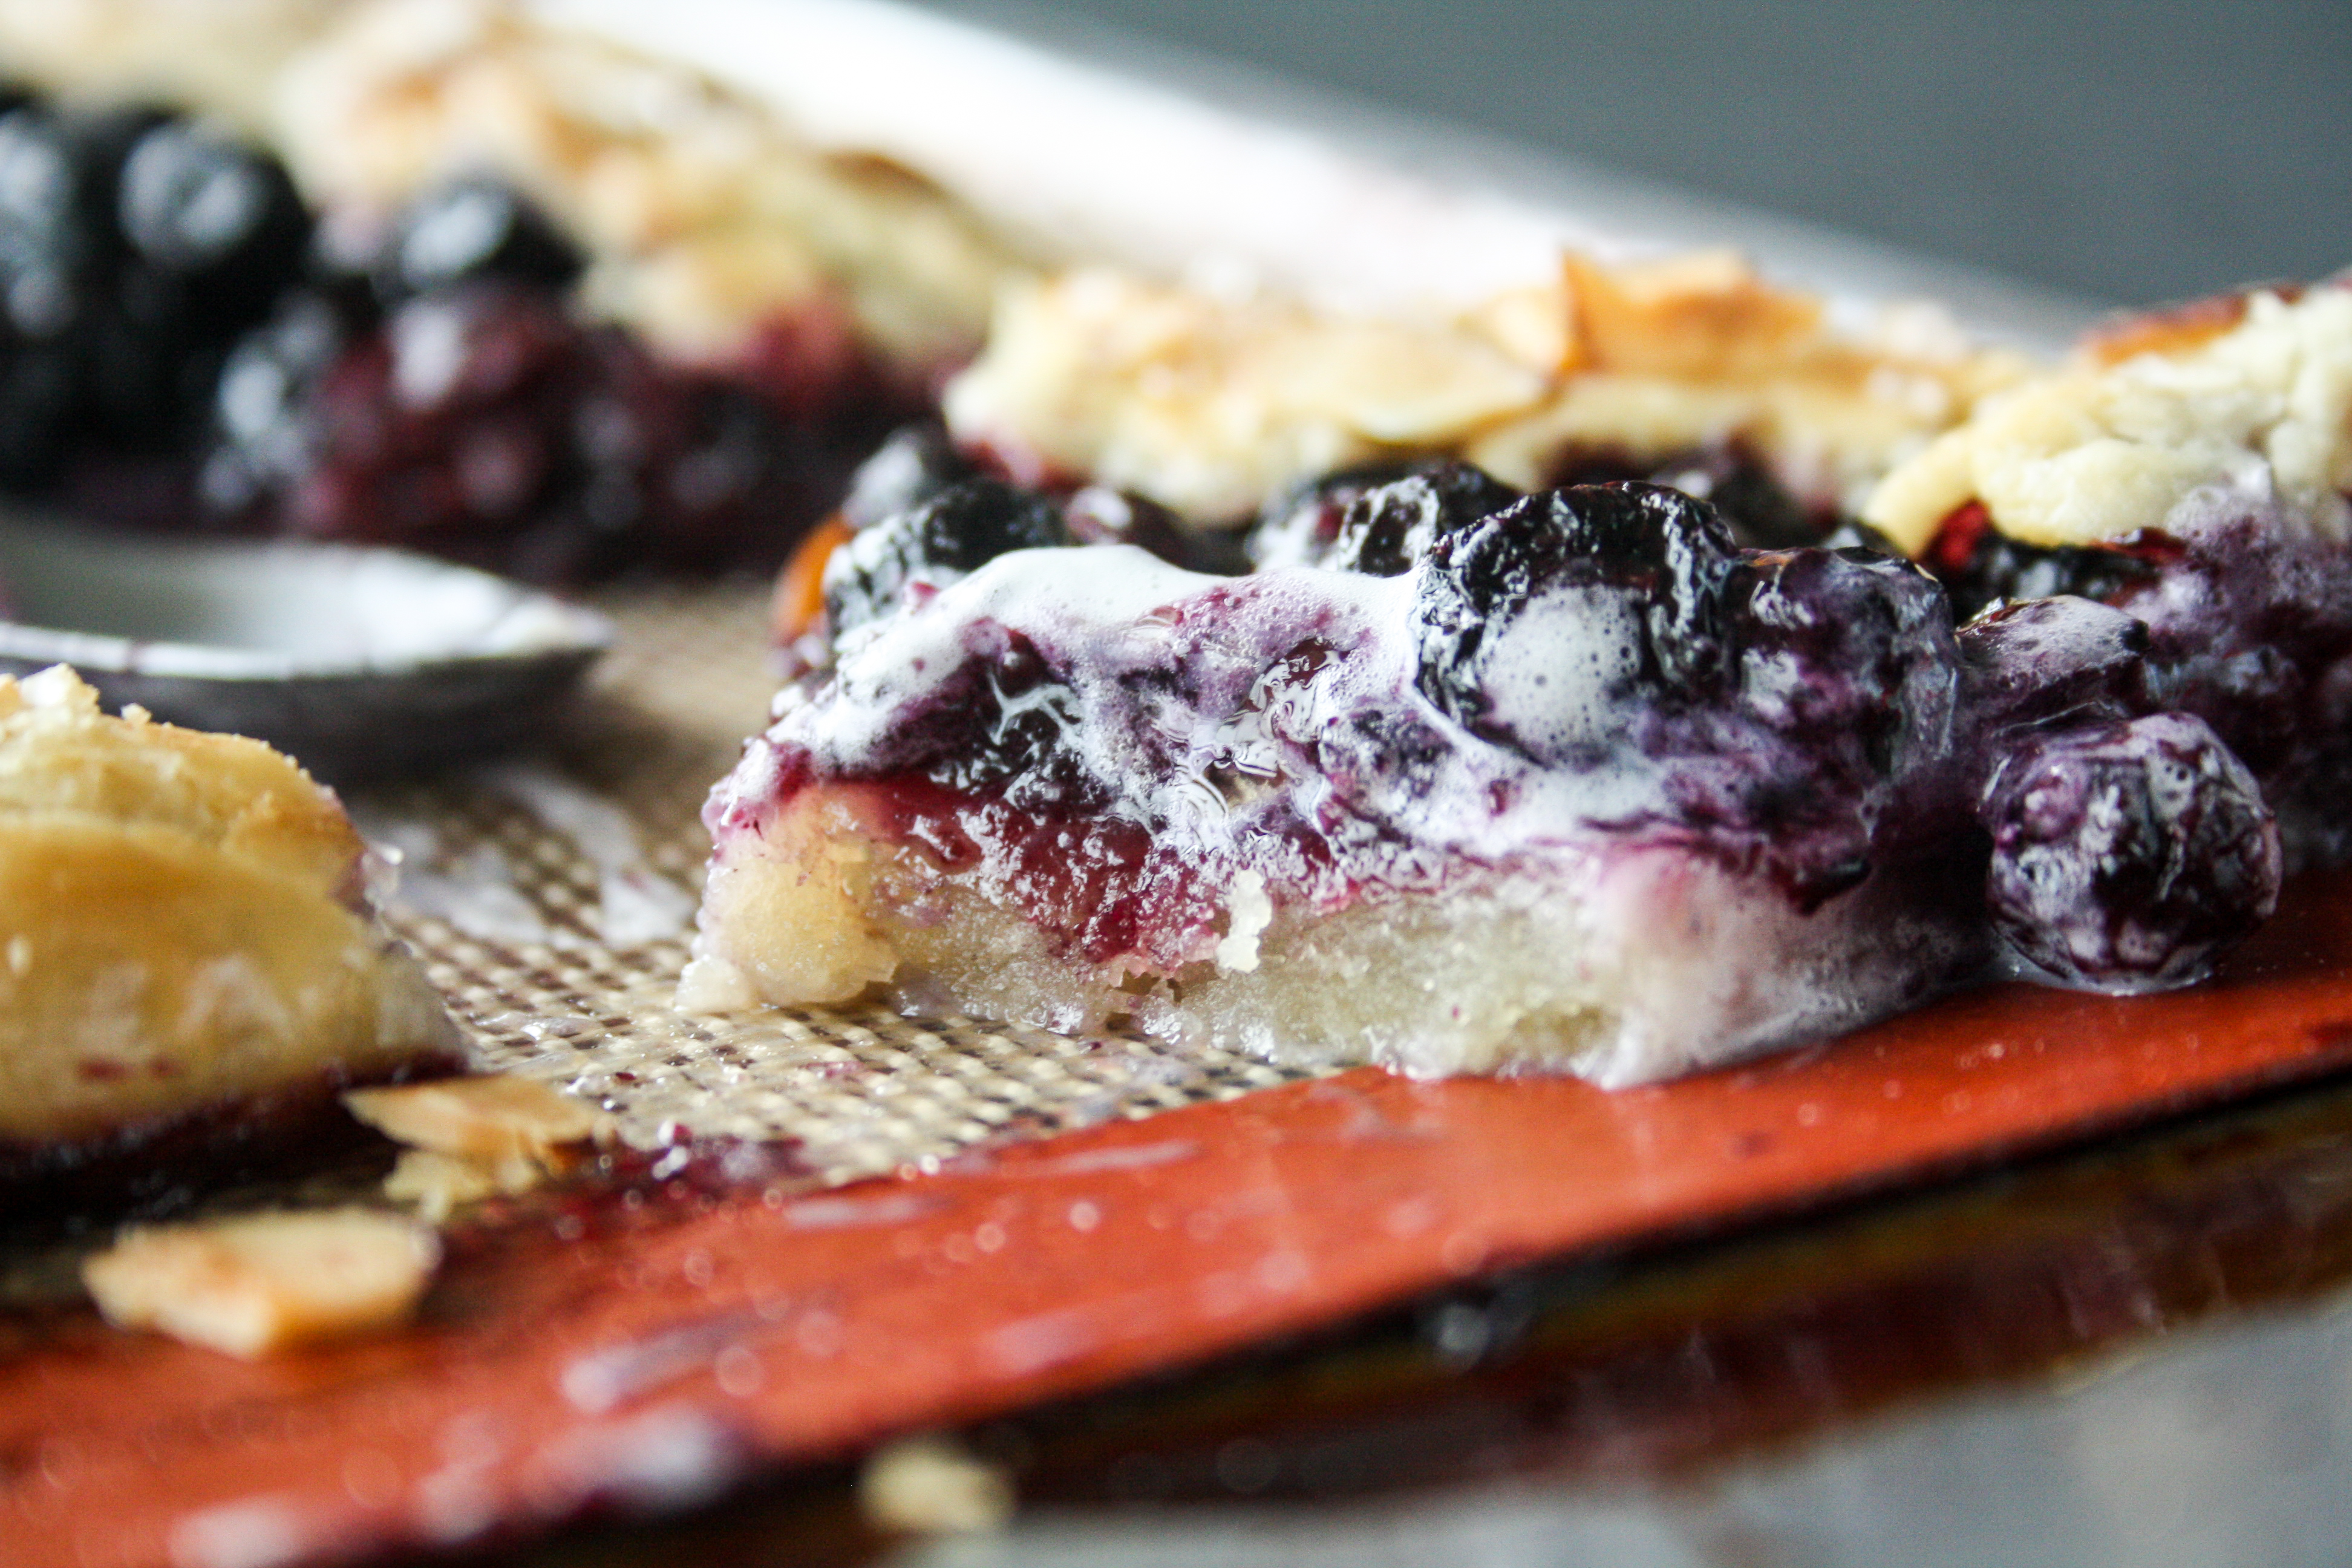 Buttery, flaky, rustic galette loaded with juicy blueberries!